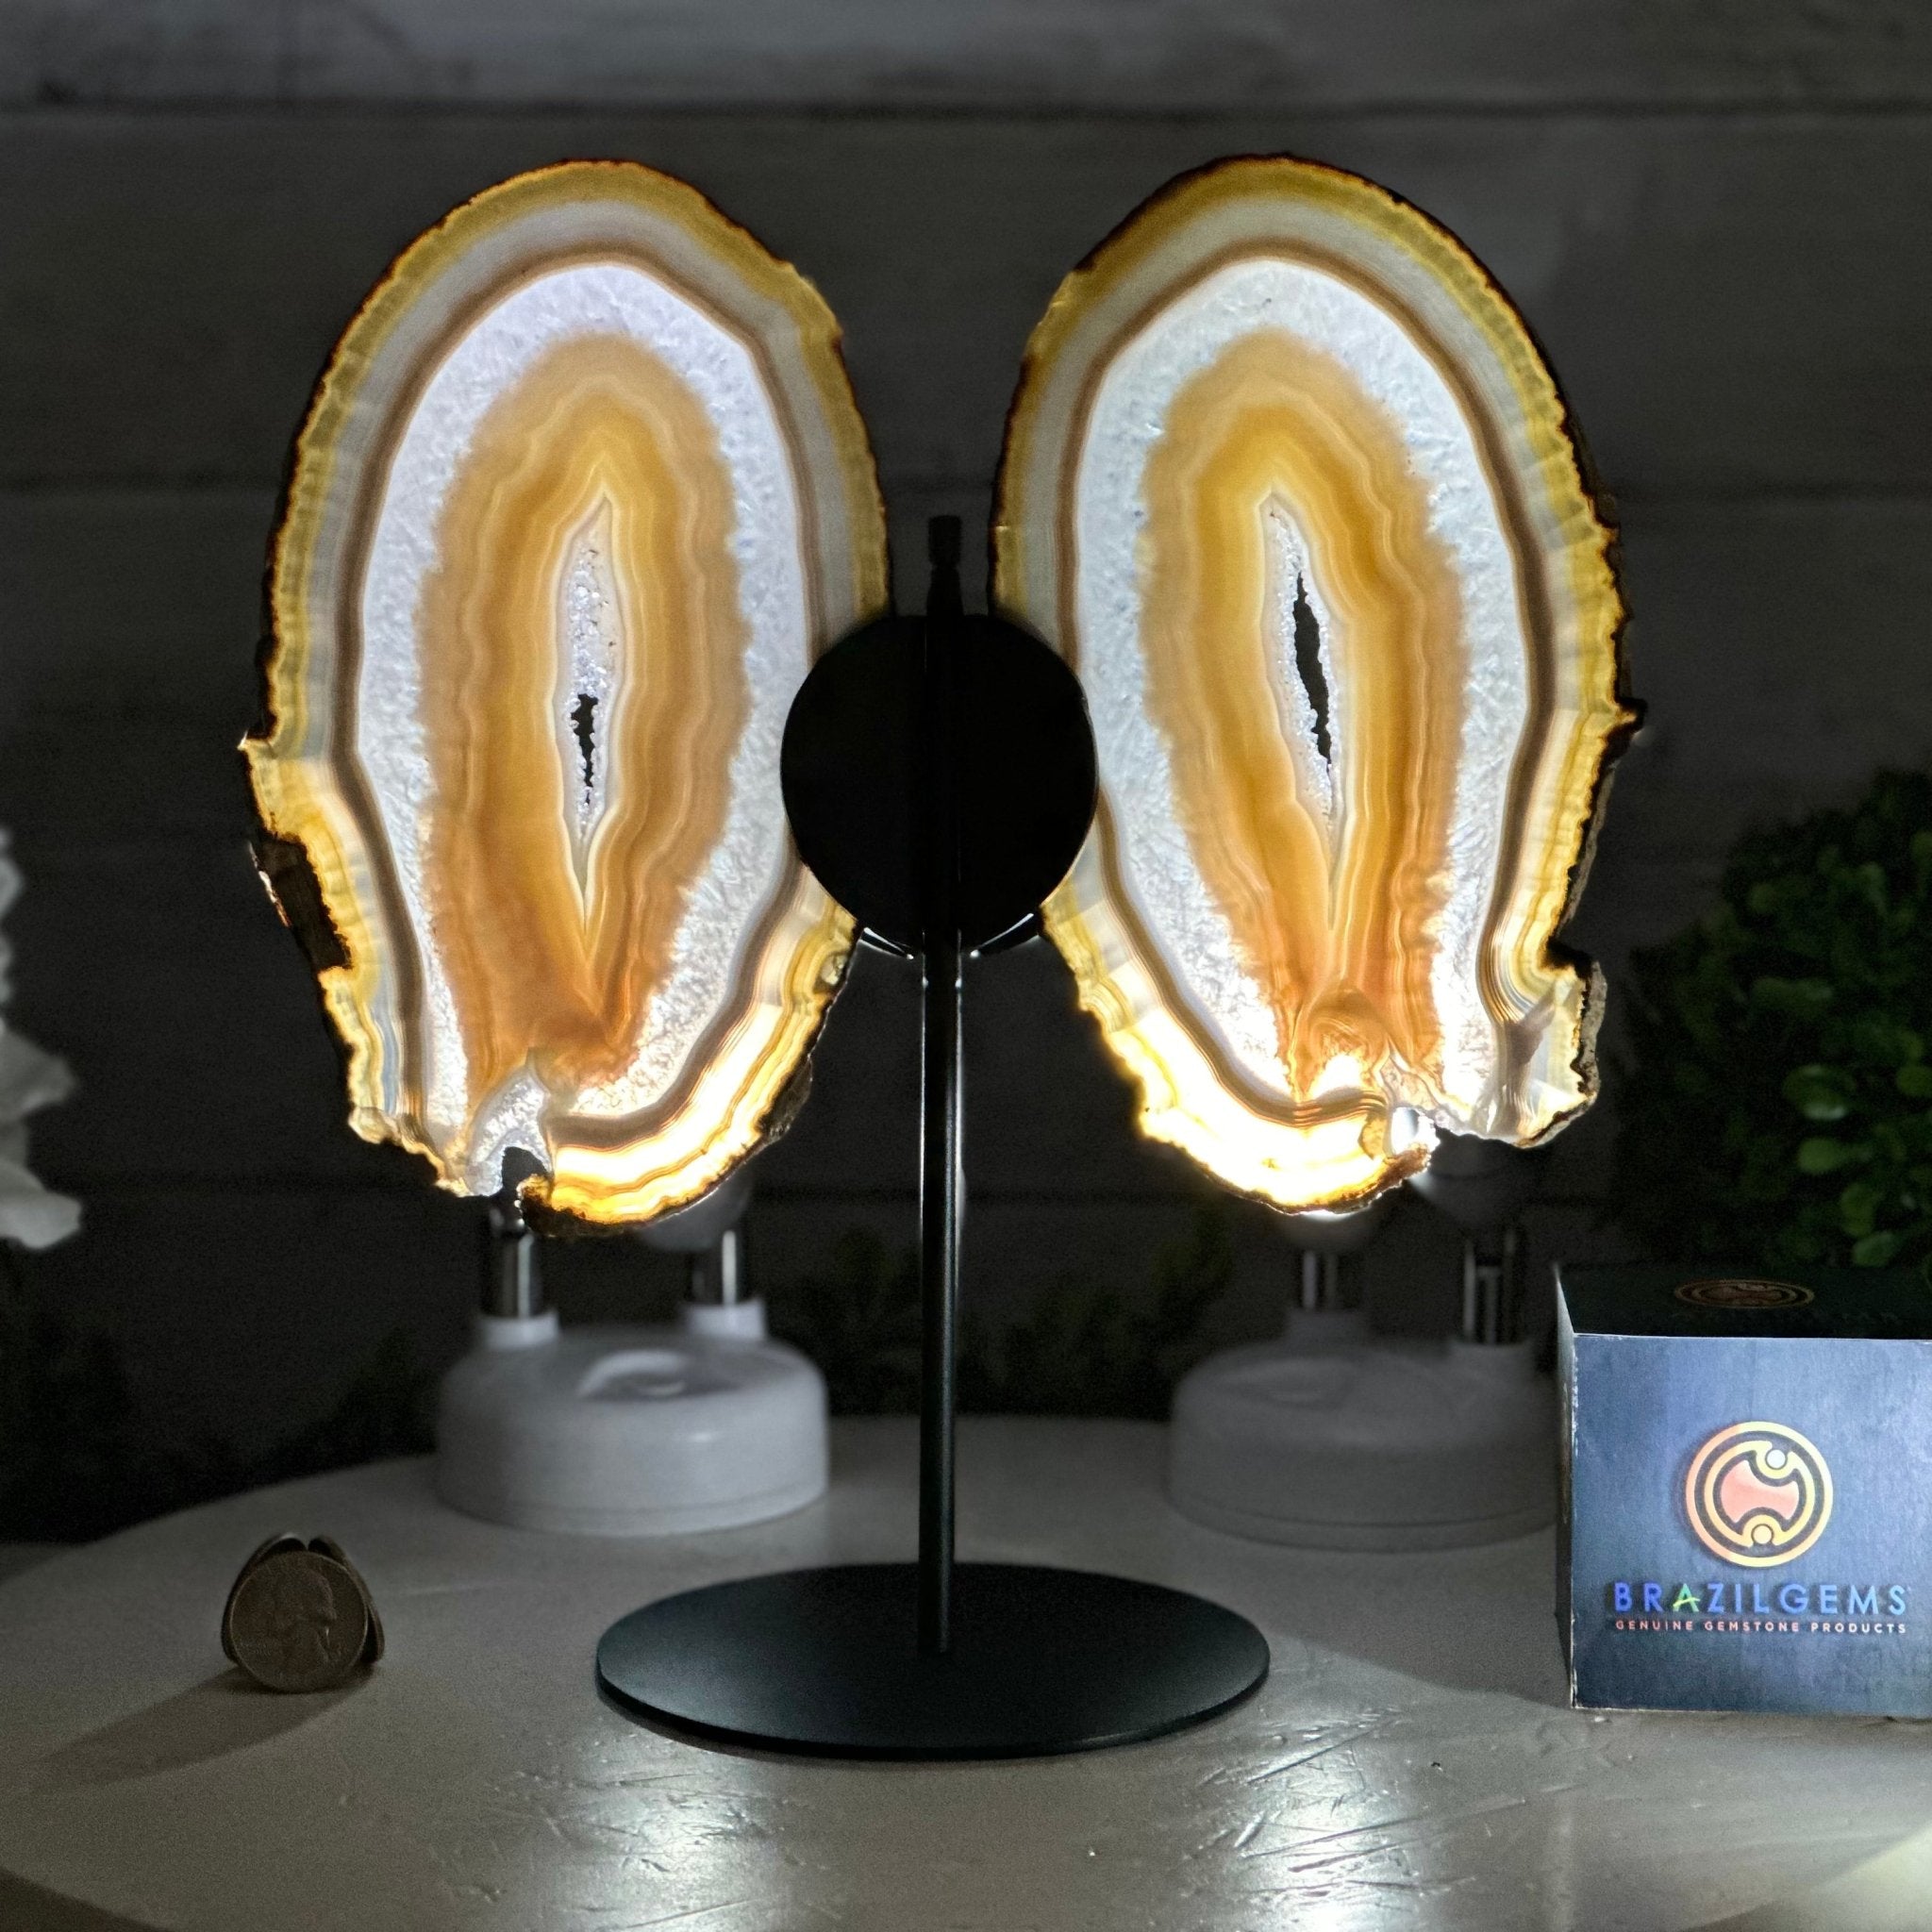 Natural Brazilian Agate "Butterfly Wings", 10.4" Tall #5050NA-118 - Brazil GemsBrazil GemsNatural Brazilian Agate "Butterfly Wings", 10.4" Tall #5050NA-118Agate Butterfly Wings5050NA-118